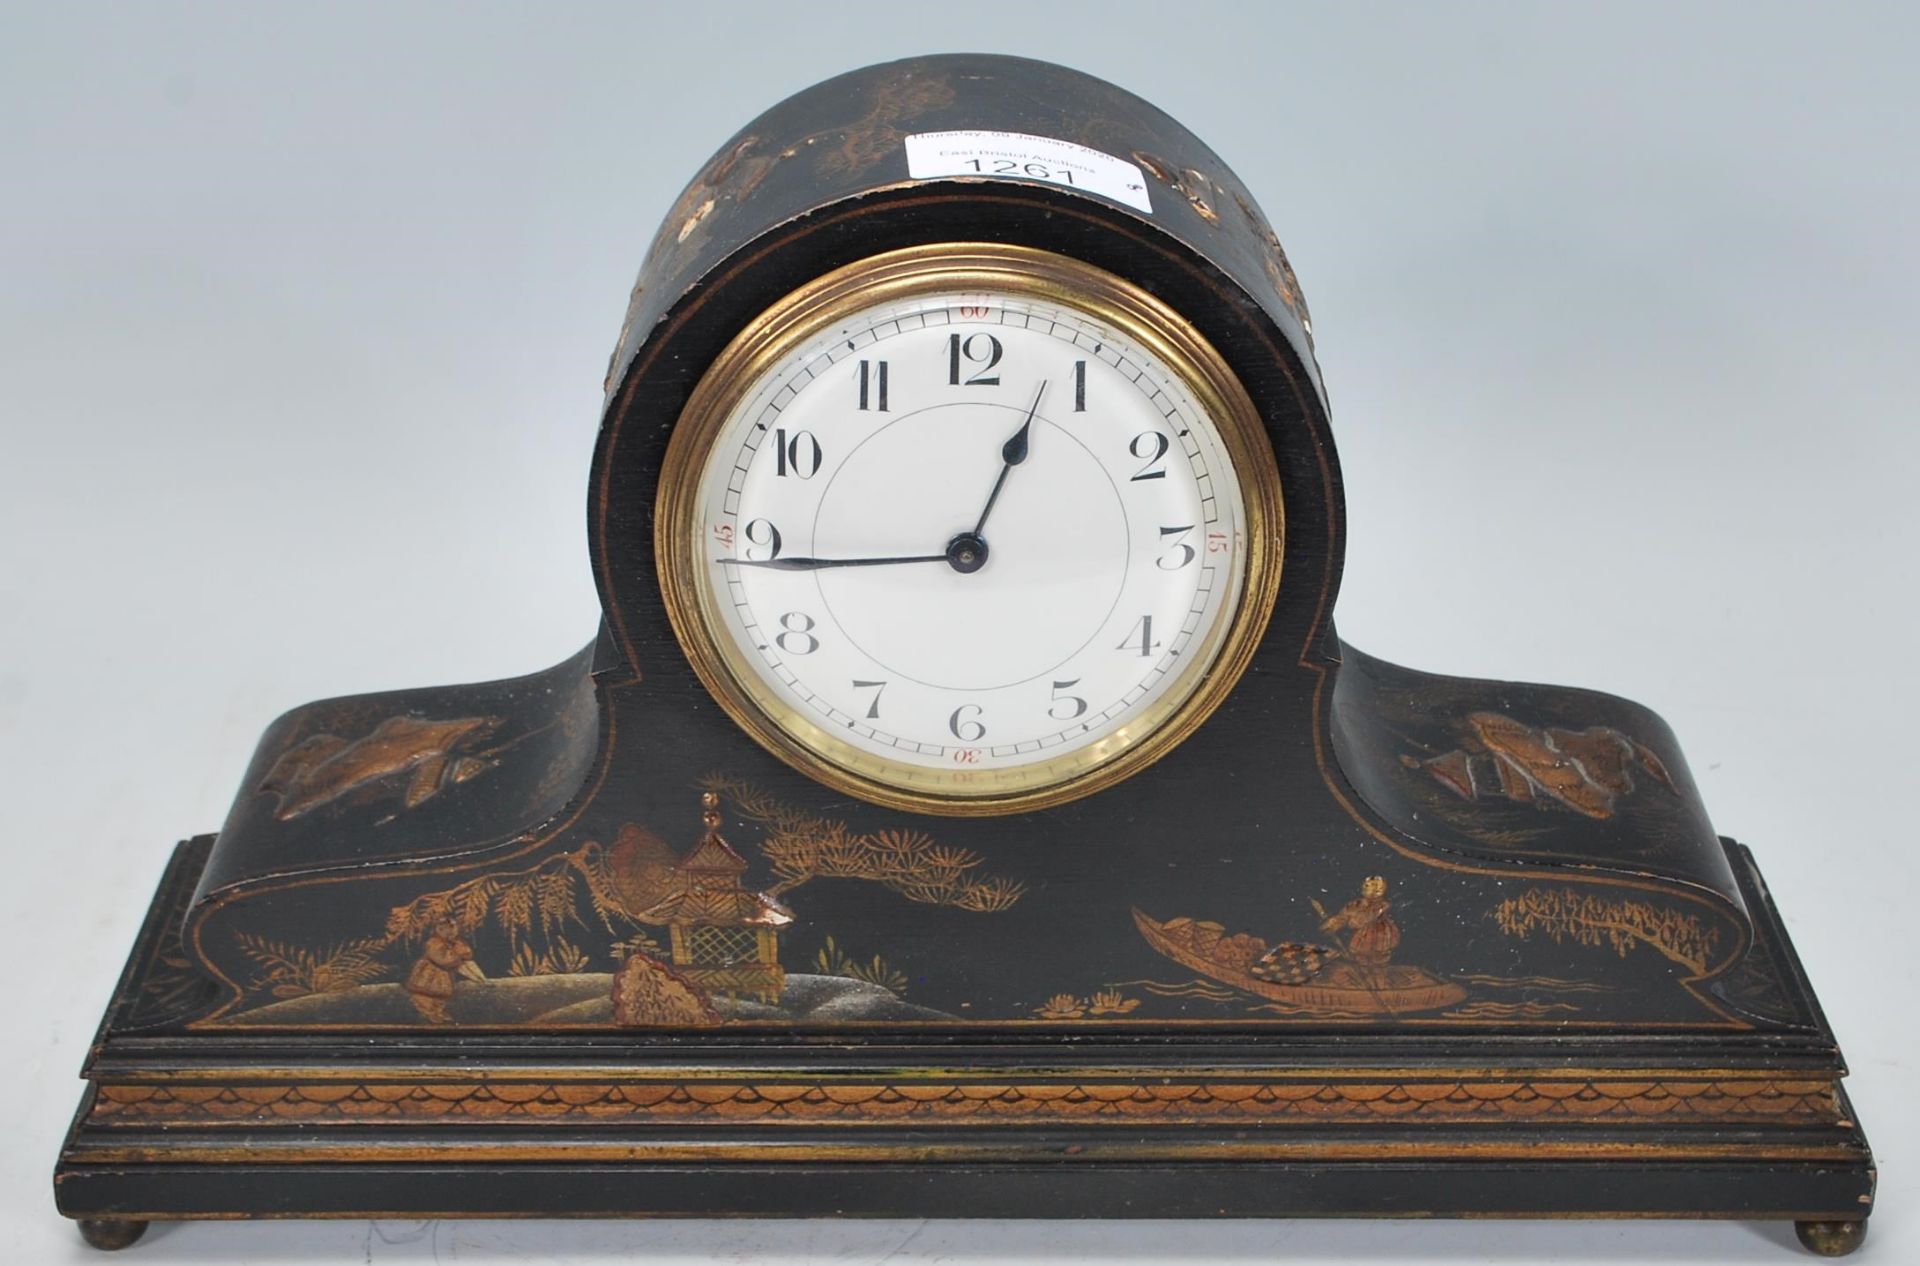 An early 20th century Japanned black lacquer and chinoiserie decorated dome top mantel clock in - Image 2 of 7